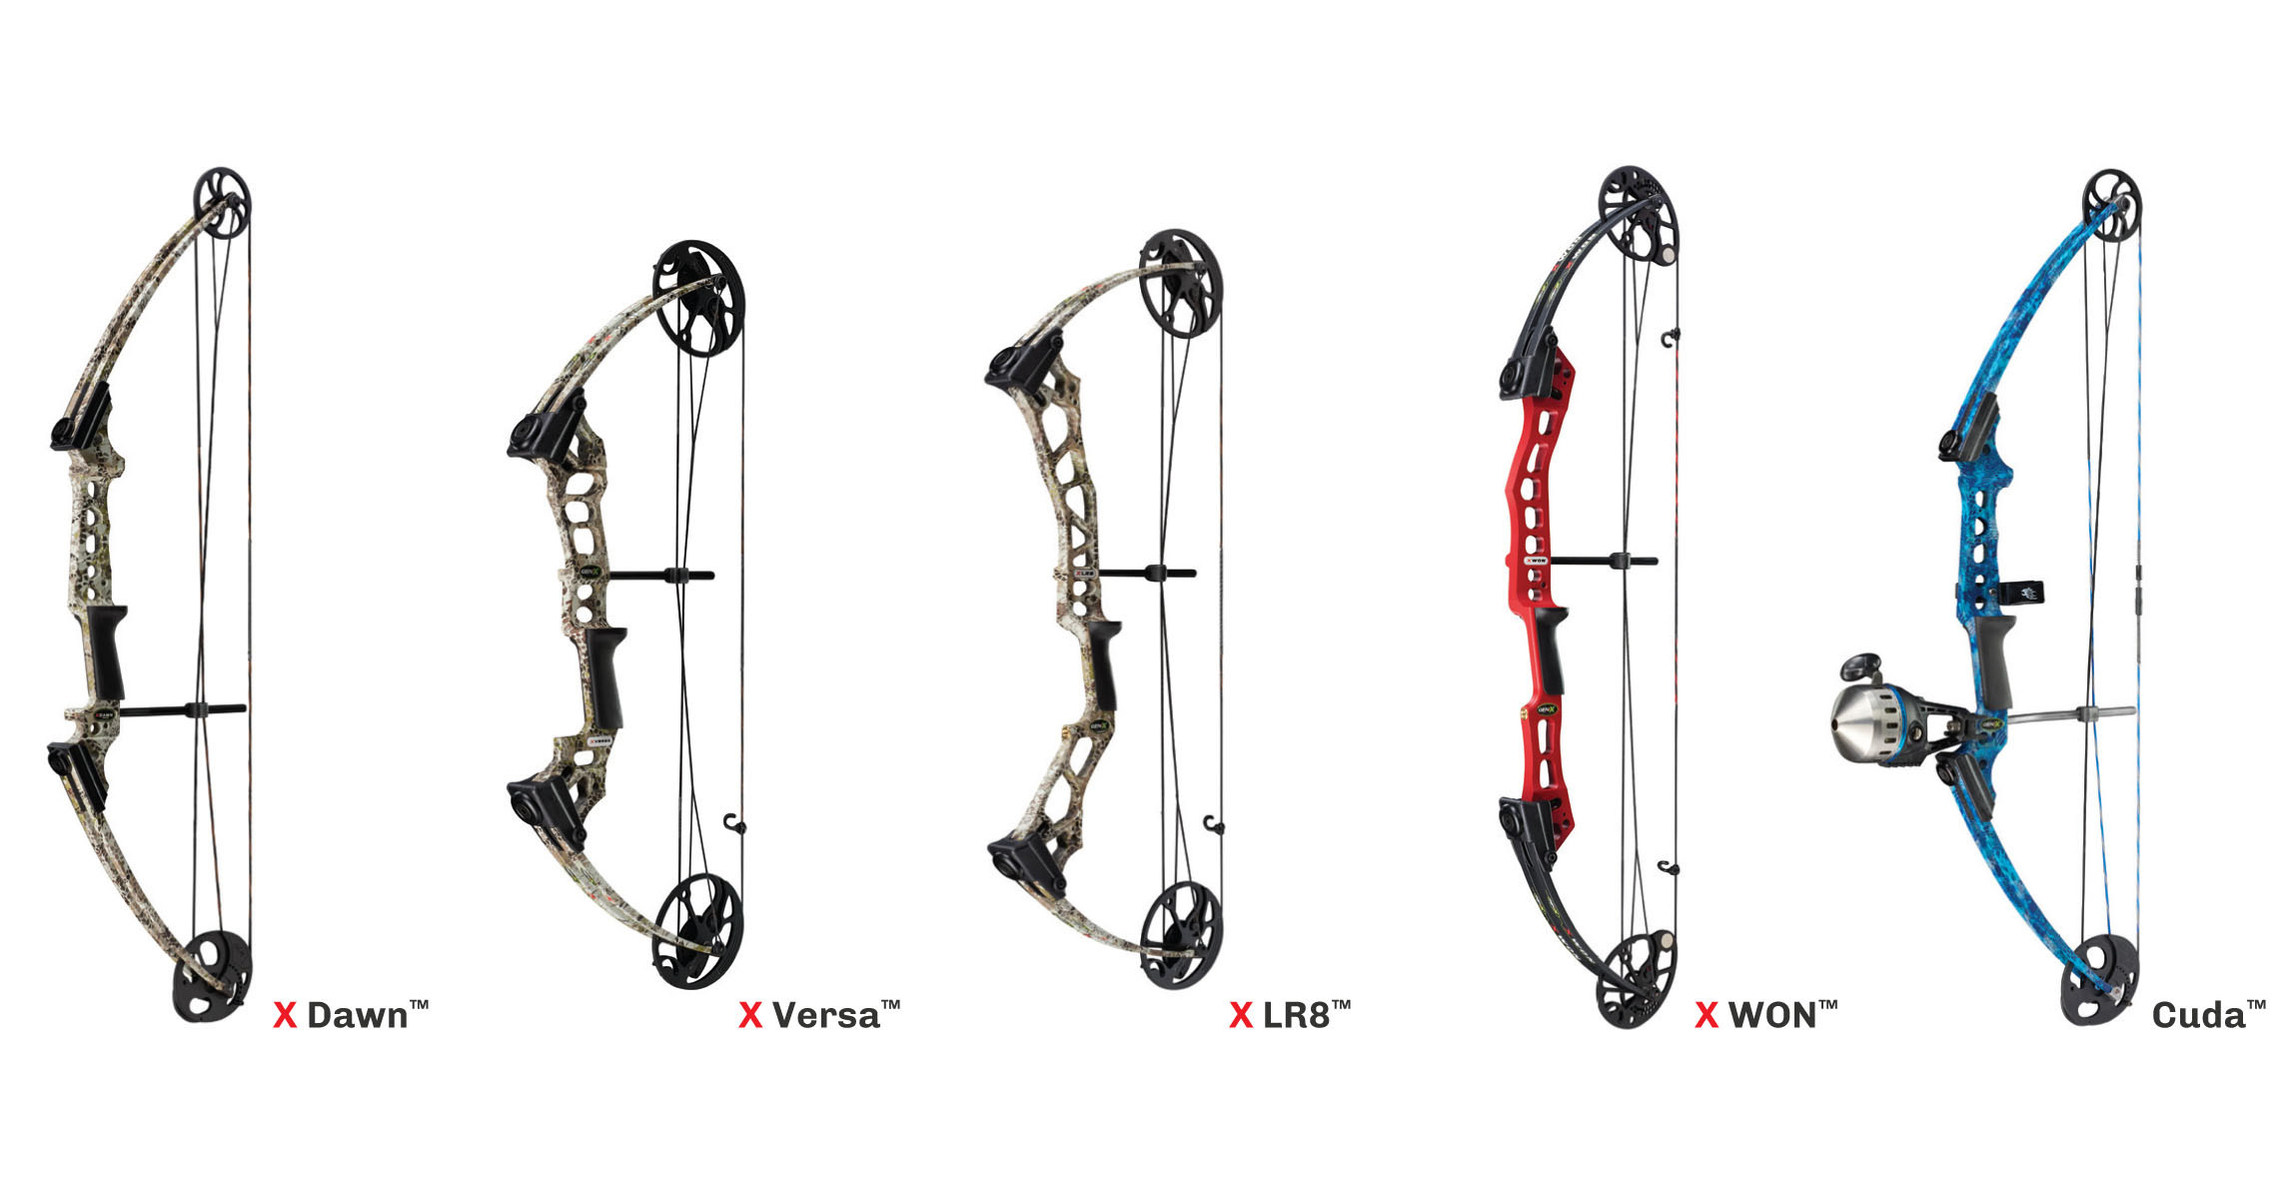 Three New Bows Added To GenX® Lineup